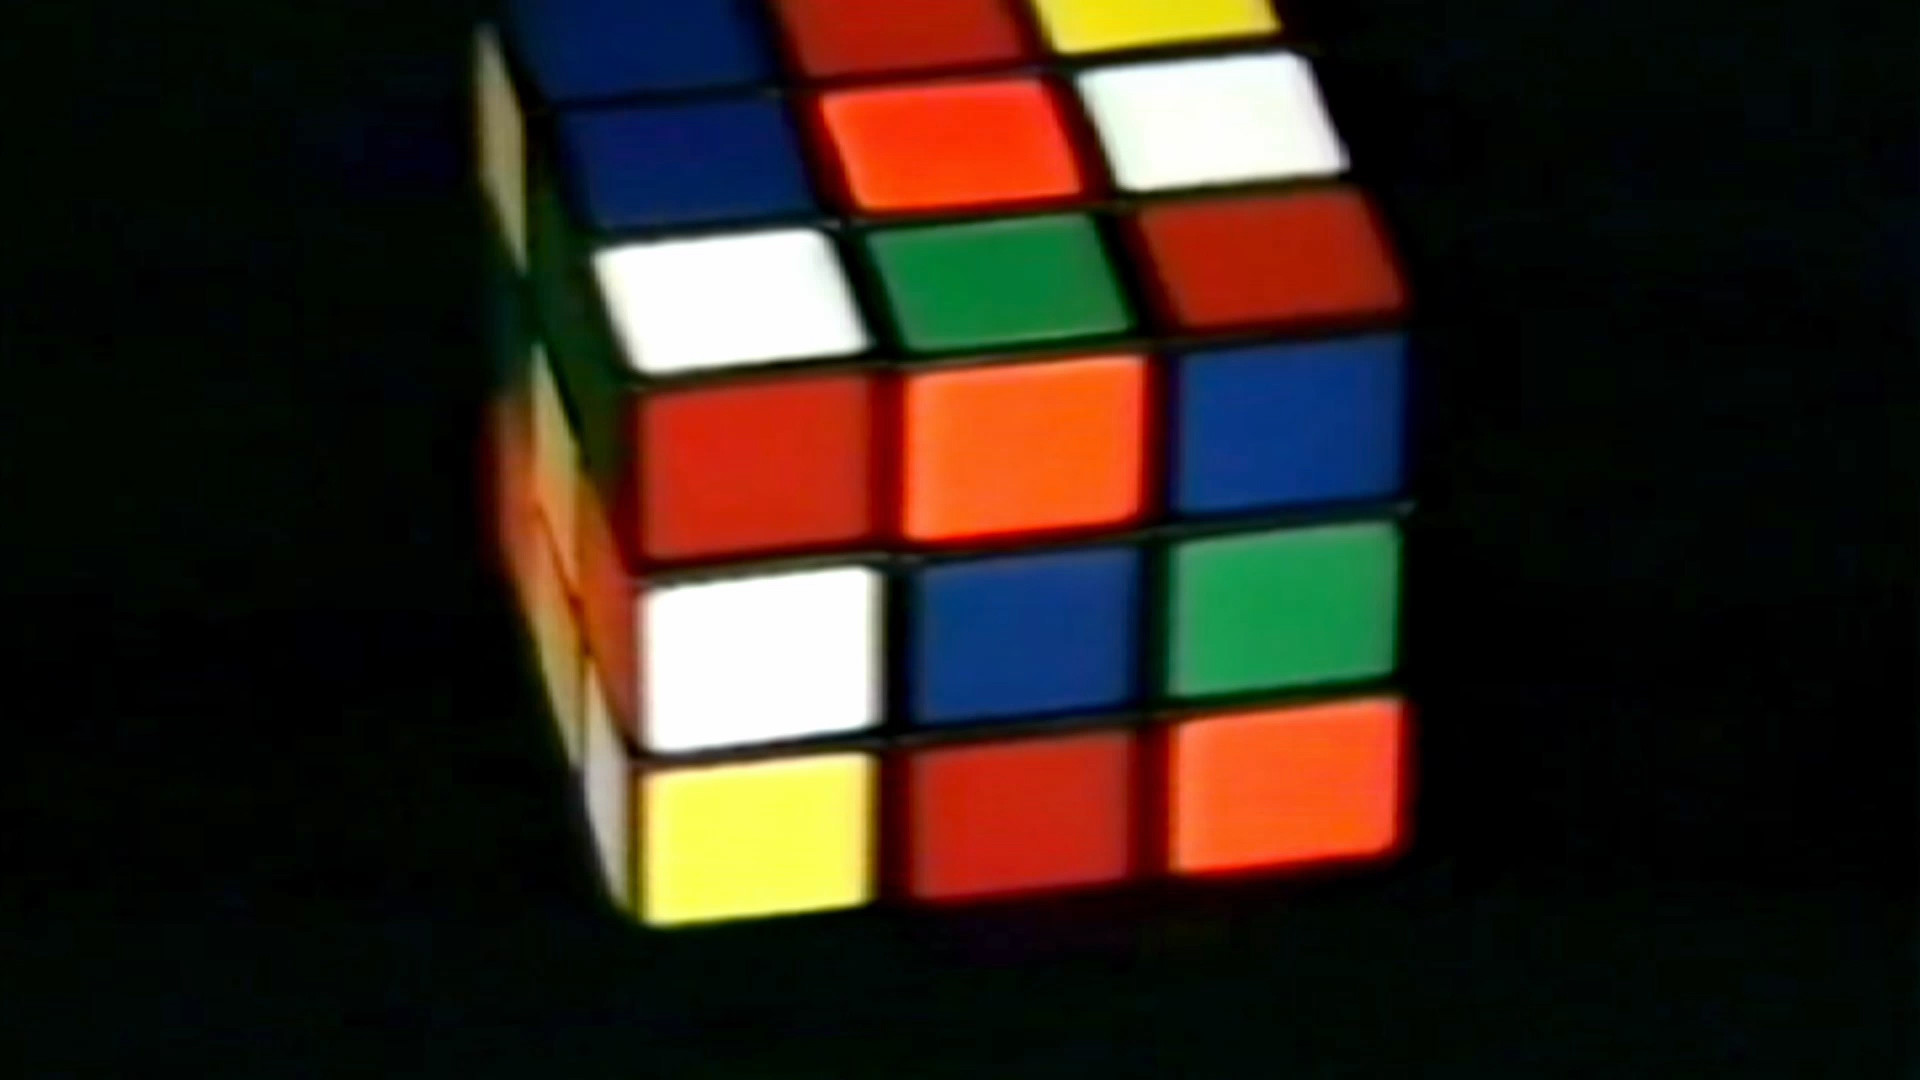 1920x1080 Solving the Rubik's Cube - The '80s: The Decade That Made Us Video -  National Geographic Channel